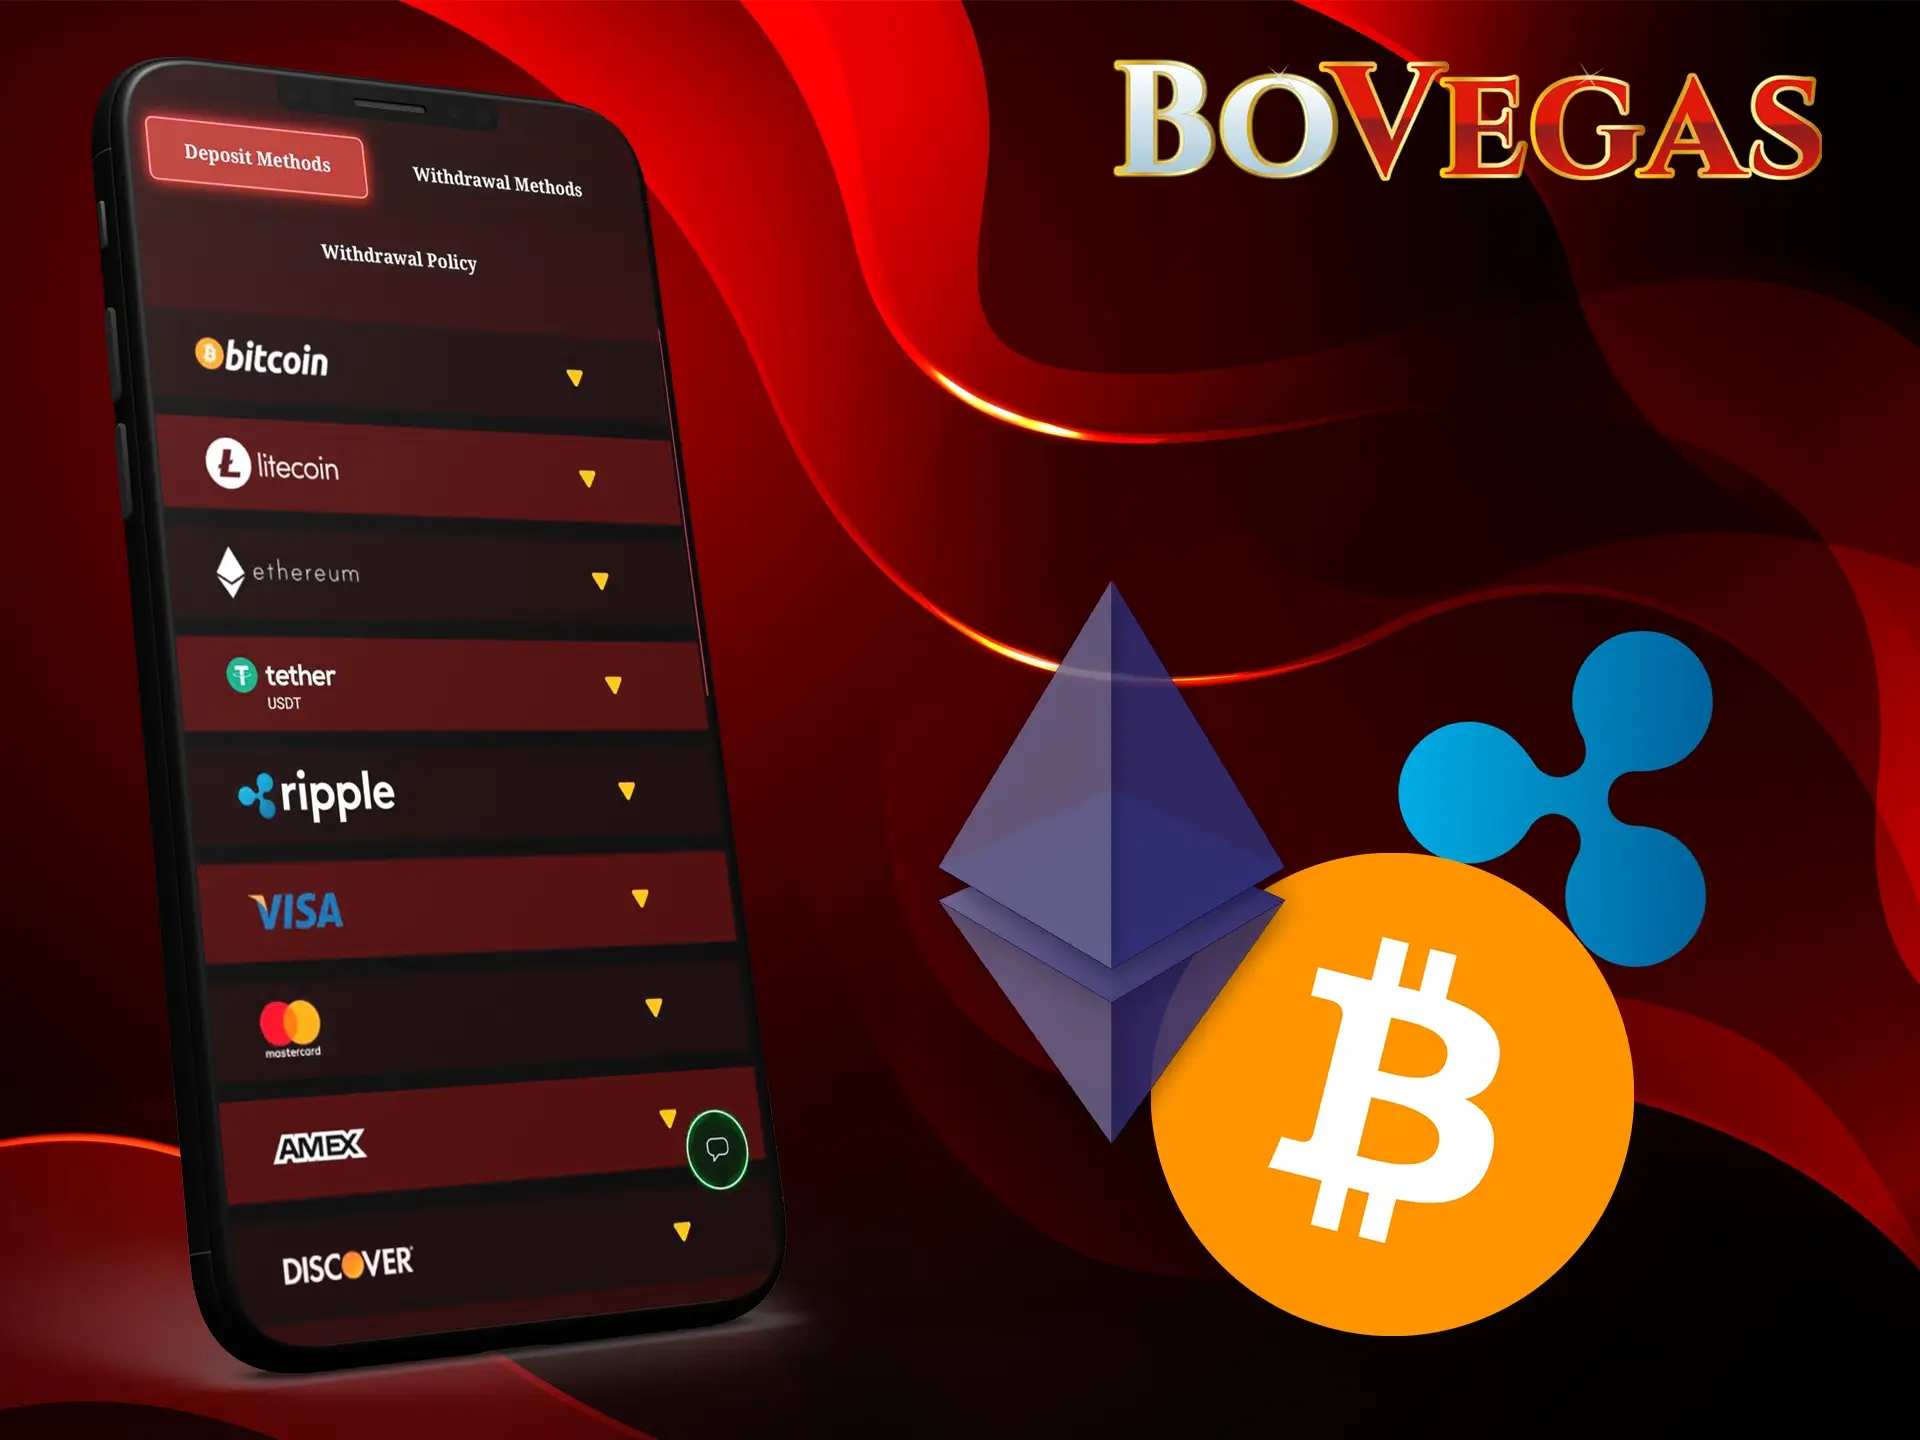 BoVegas mobile version accepts many popular payment methods in Australia.